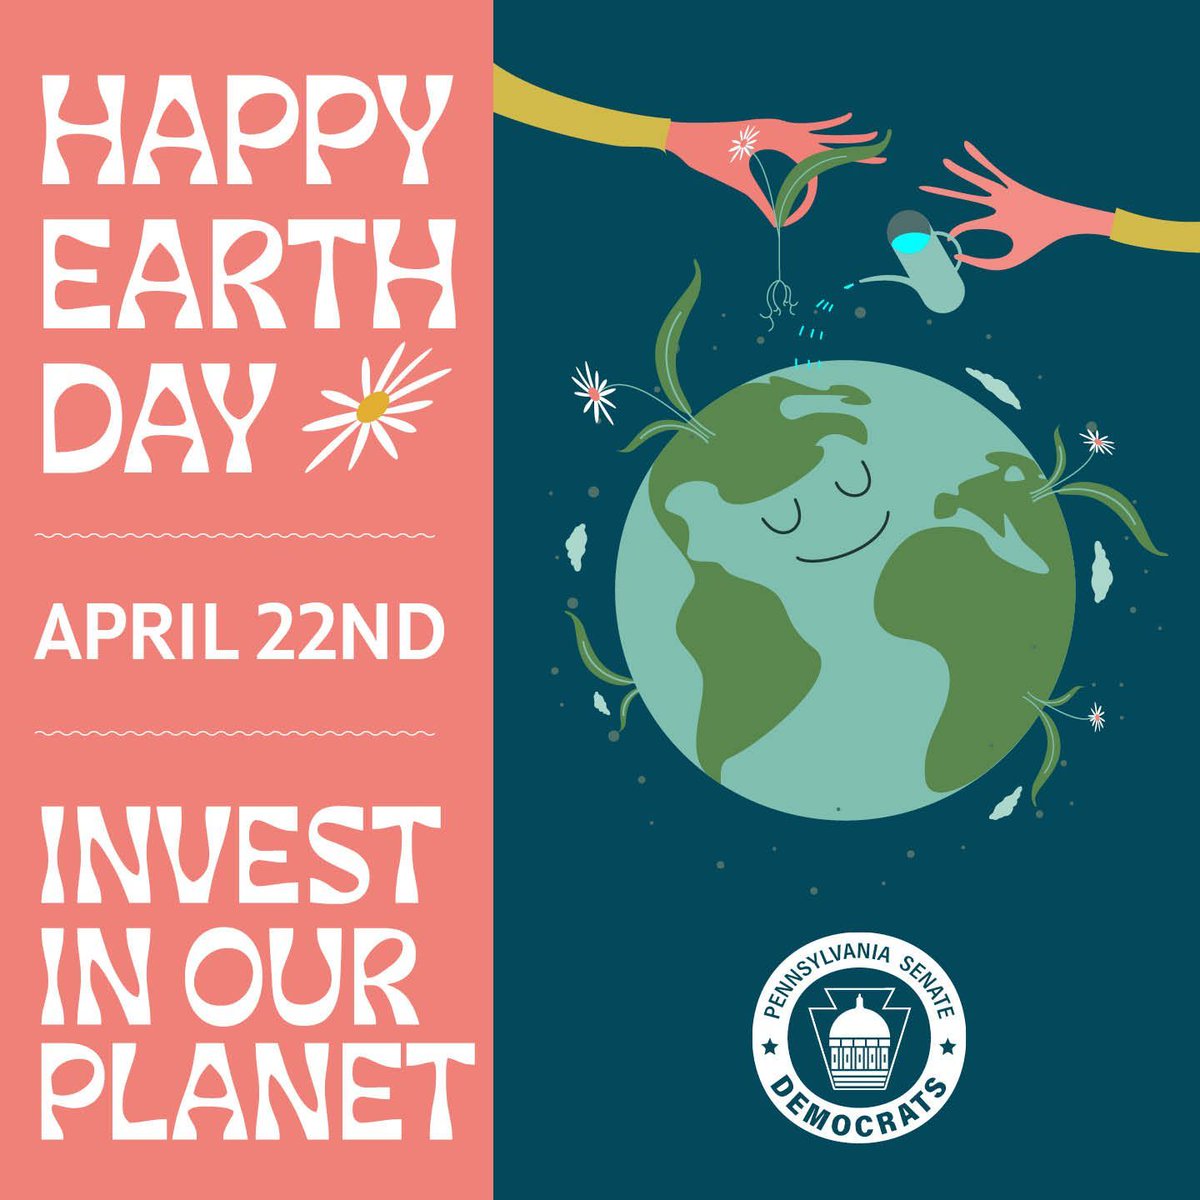 Happy #EarthDay! It's important for us to remember that we inherited this planet from our ancestors to pass it on to our children. The responsibility of taking care of it, rests on our shoulders. Let's make sure we're looking after it every single day.